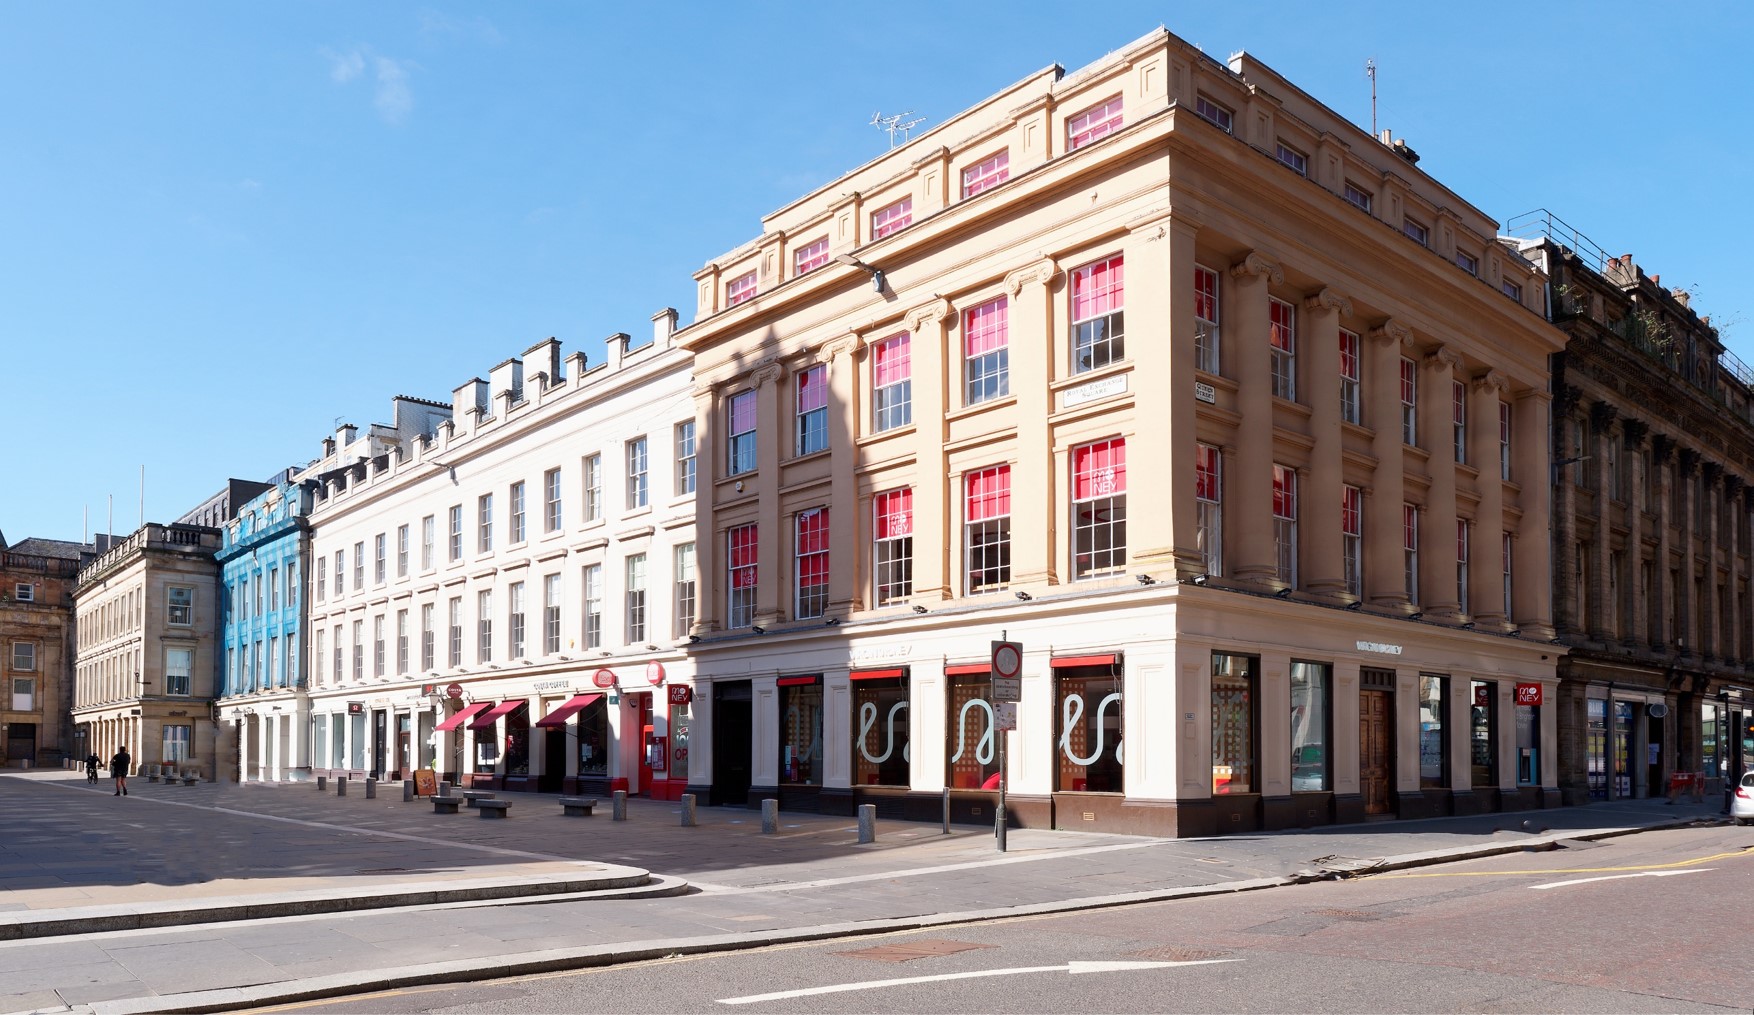 Glasgow’s Royal Exchange Square building for sale